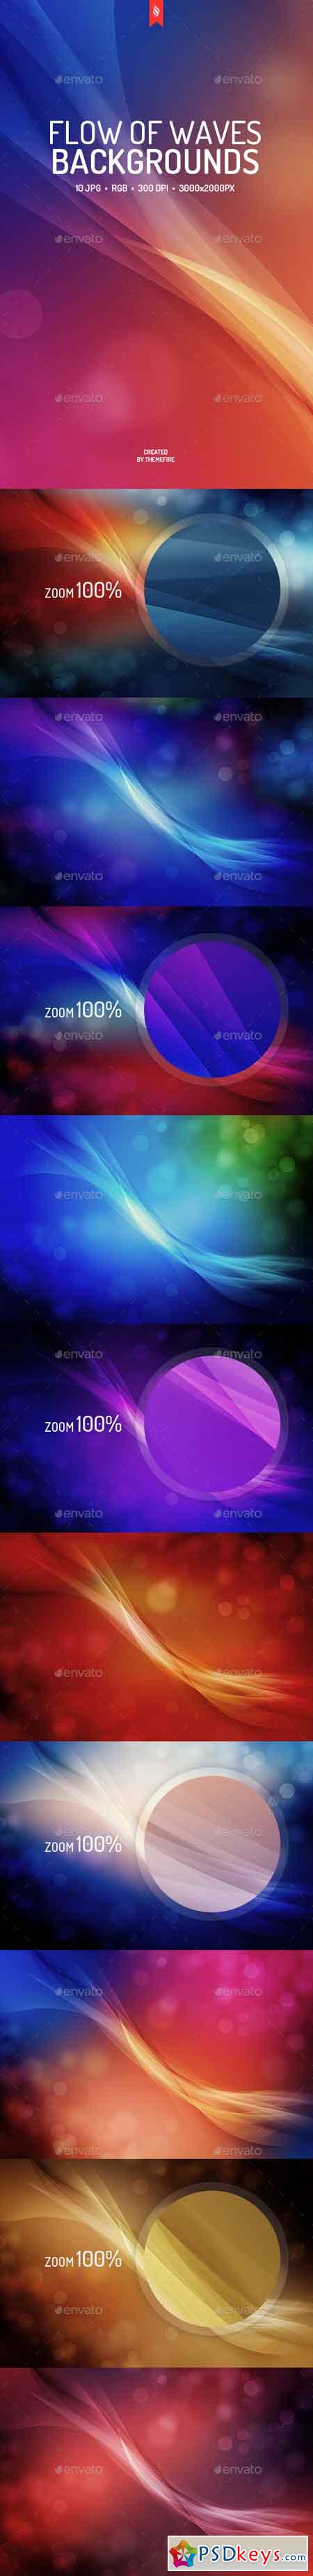 Flow of Waves Backgrounds 19170039